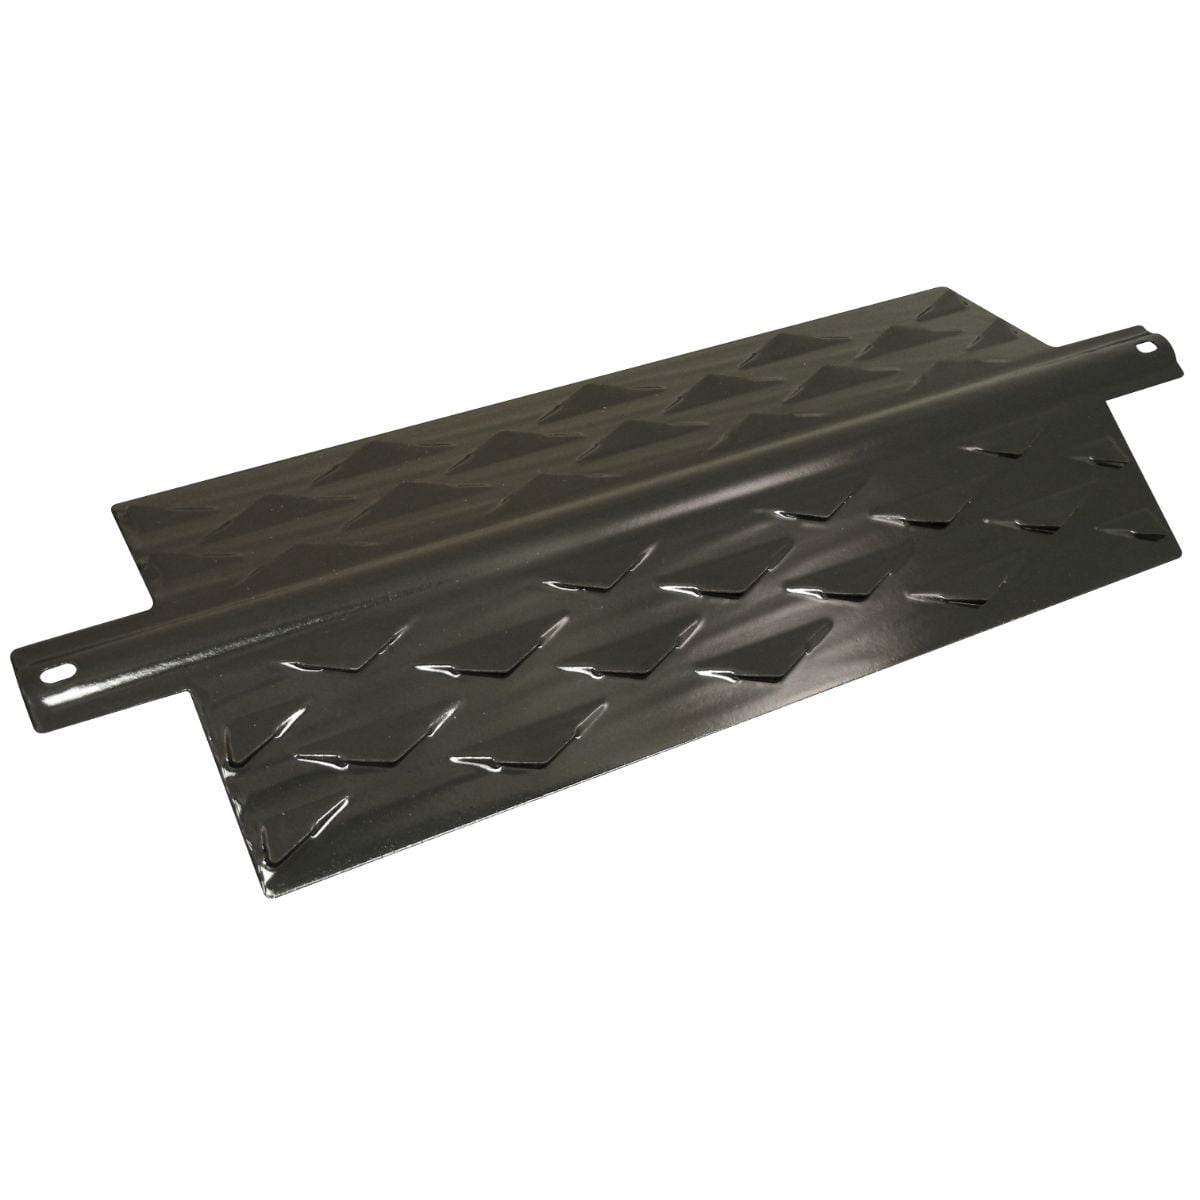 BBQ Gas Grill Porcelain Steel Heat Plate for Uniflame JPX581-4